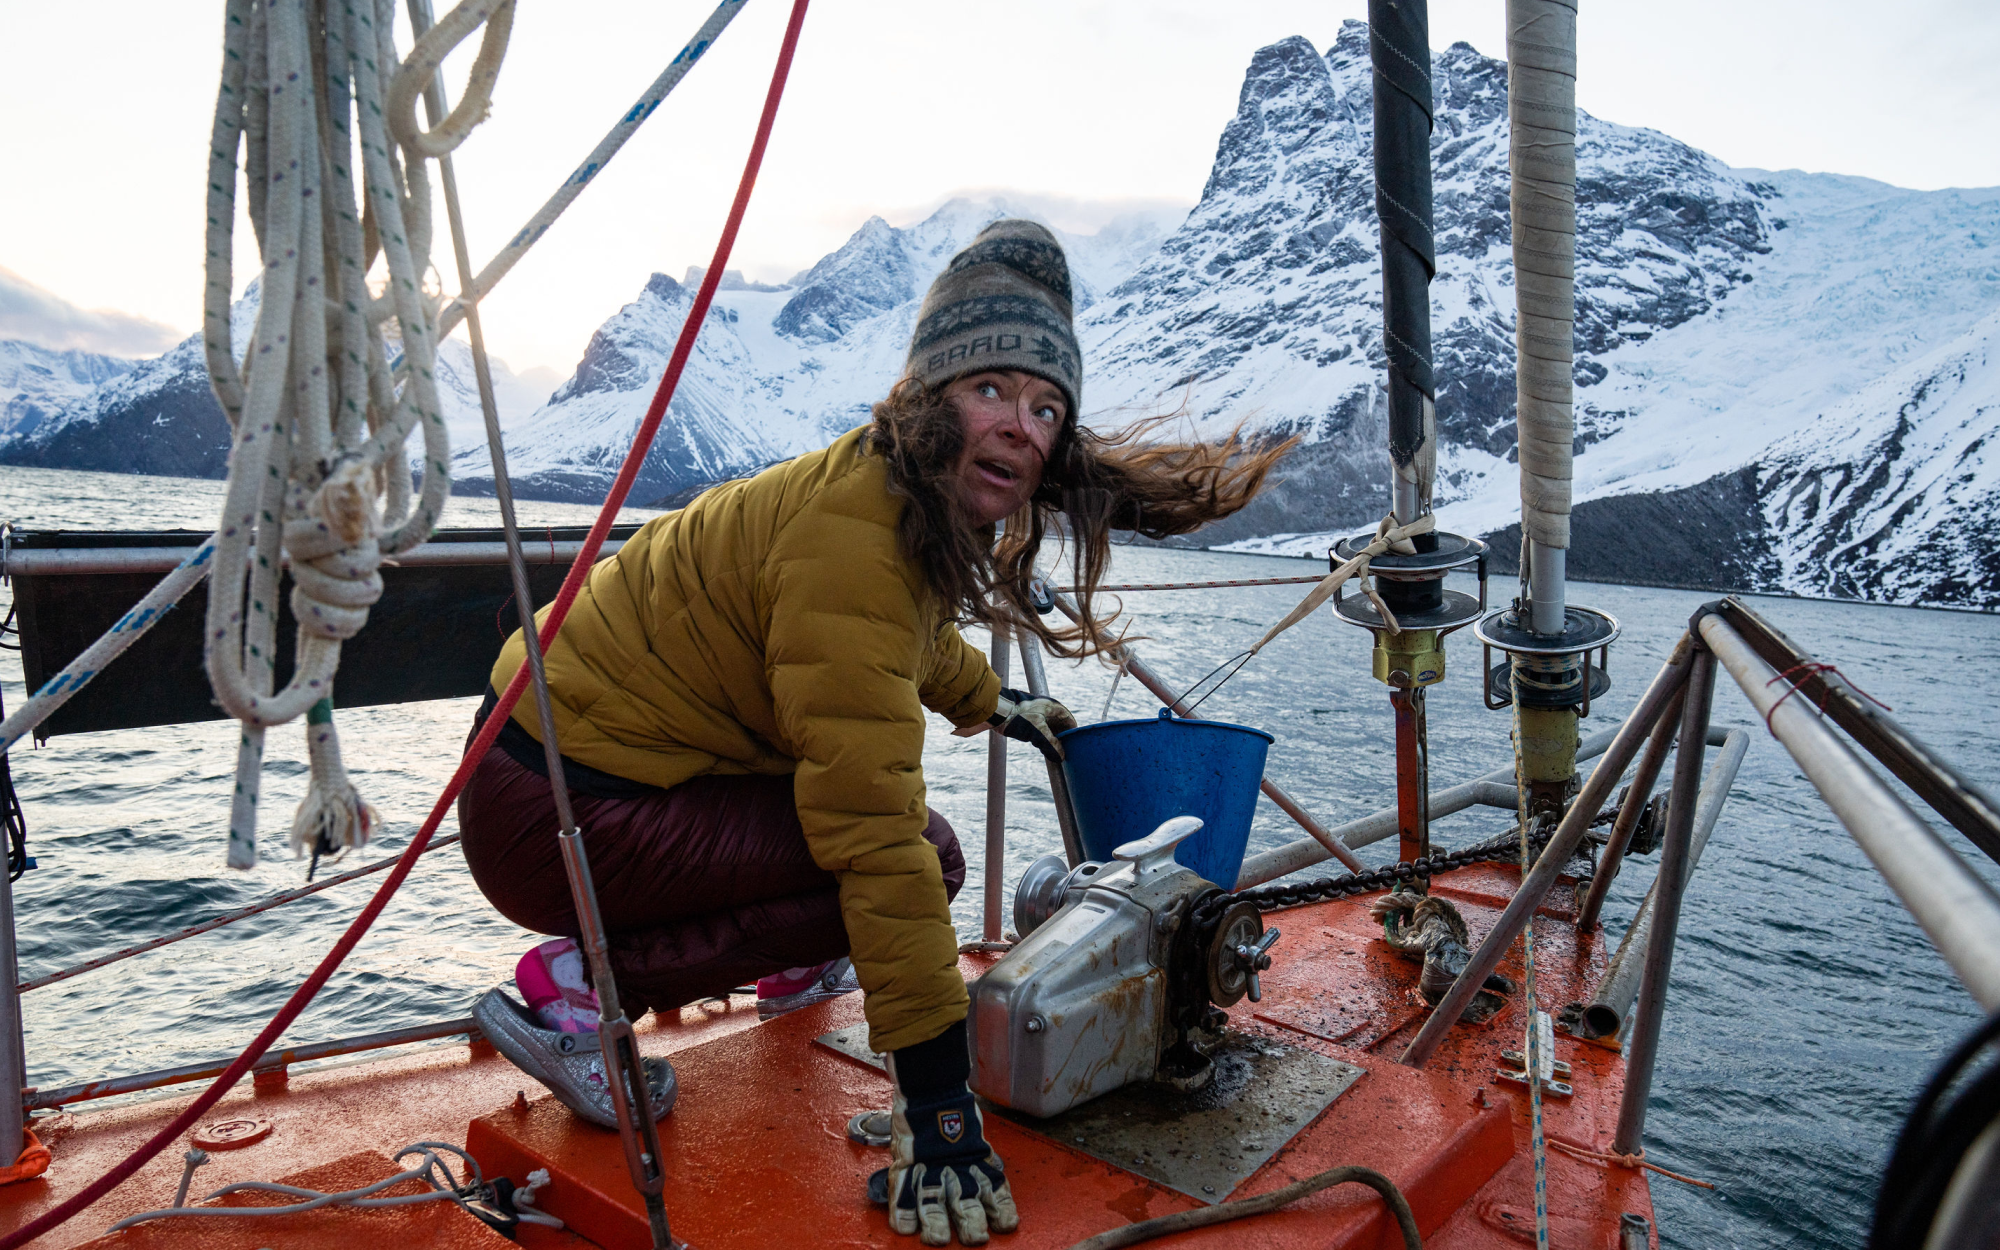 Rachael on the sailboat in Greenland, taking in her breathtaking surroundings.